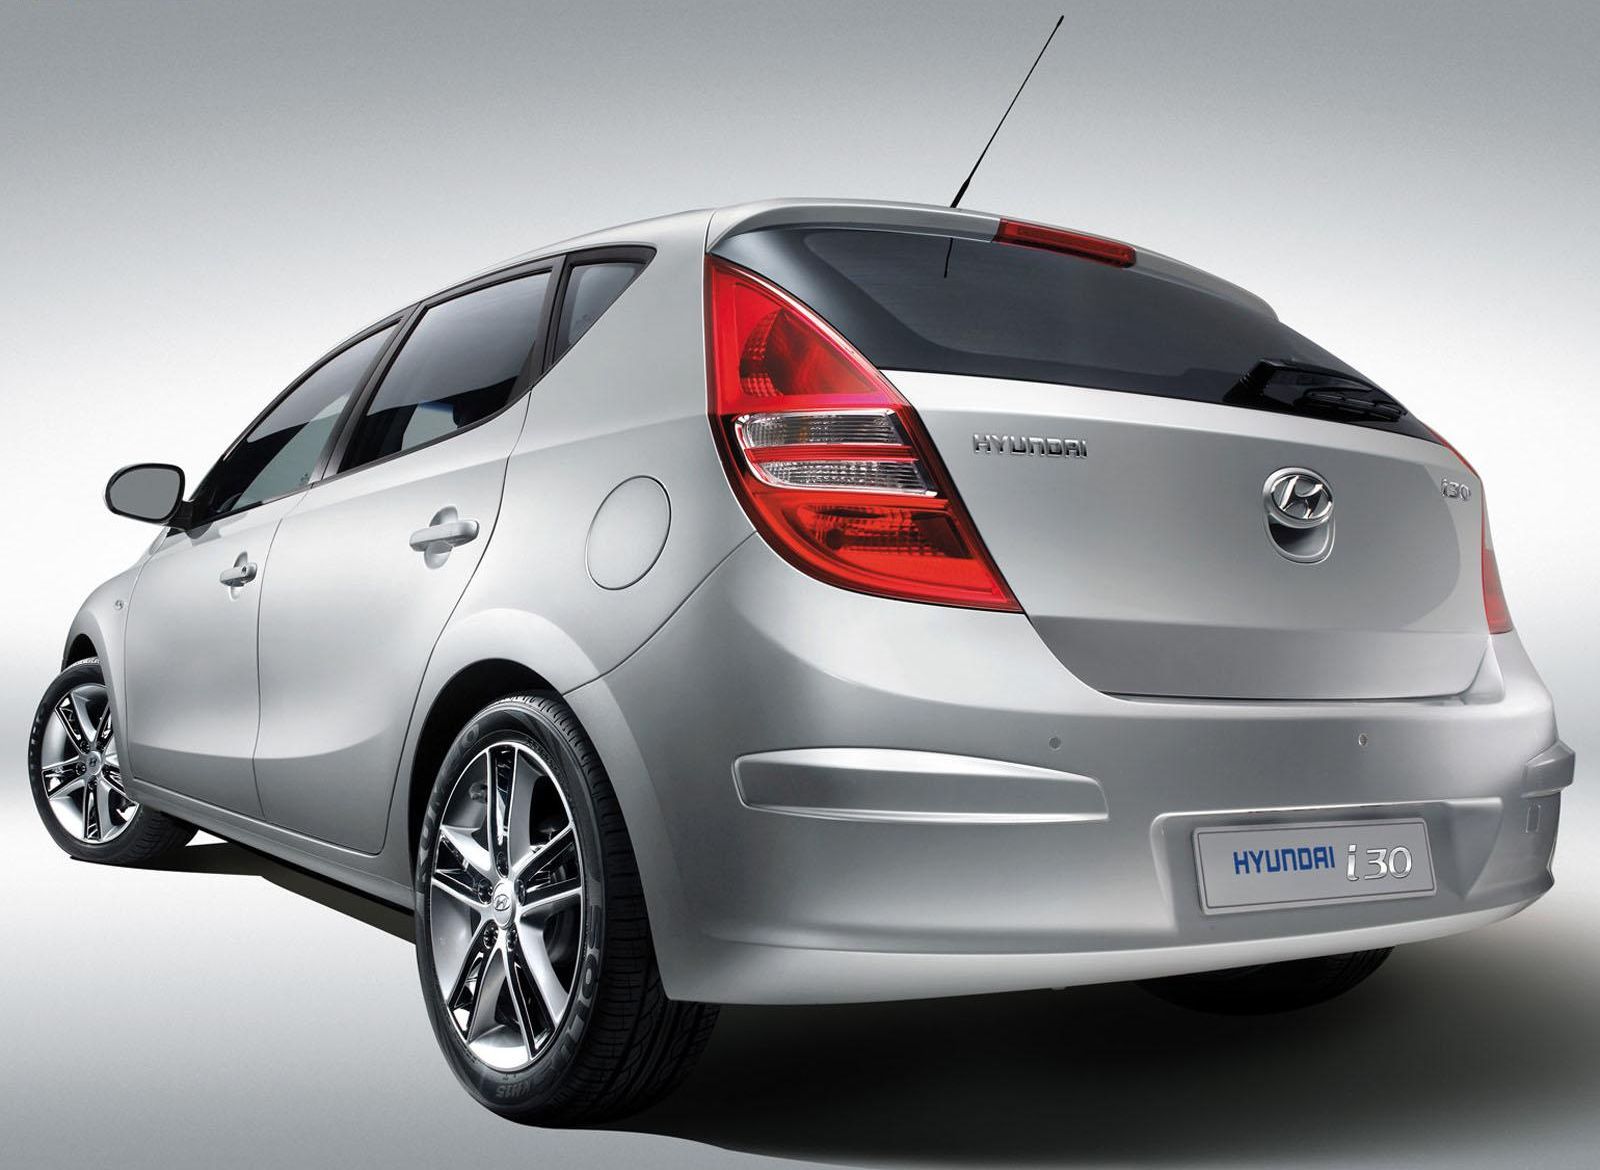 Hyundai I30 2008 Review, Amazing Pictures and Images